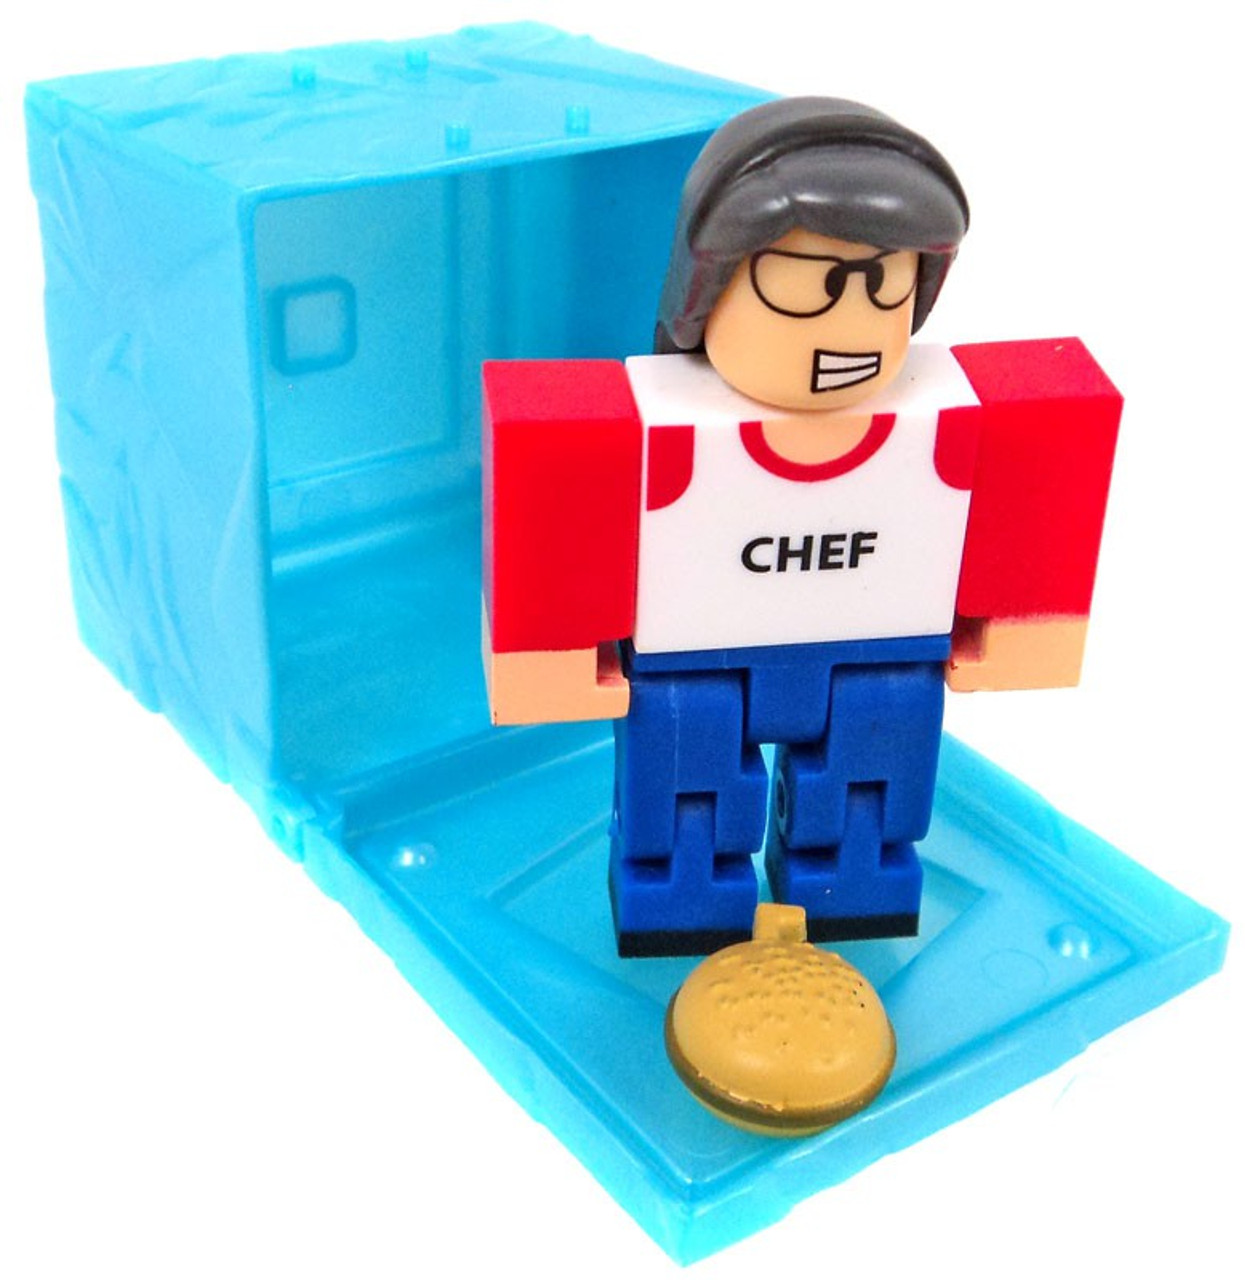 Roblox Red Series 3 High School Life Lunch Lady 3 Mini Figure Blue Cube With Online Code Loose Jazwares Toywiz - roblox high school life codes 2020